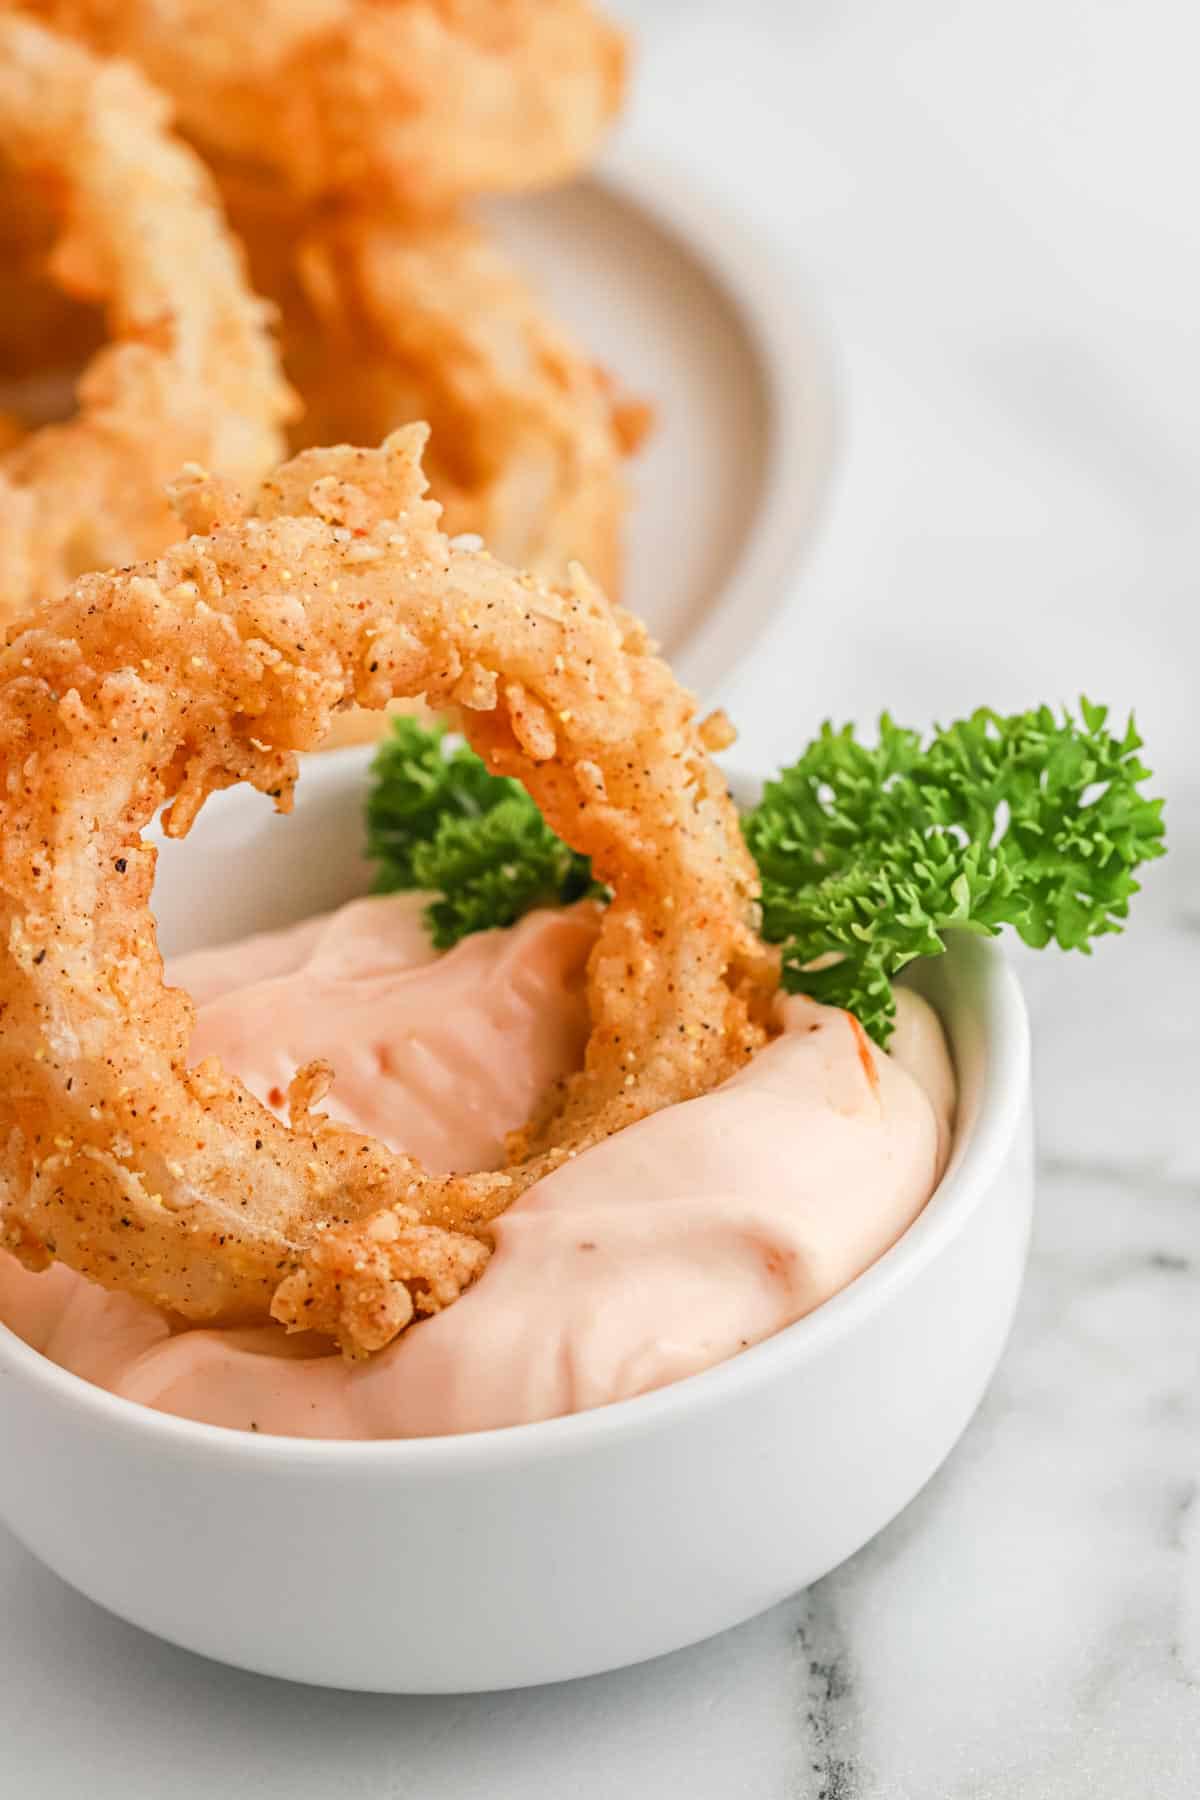 Dipping an onion ring into a pink sauce in a bowl.